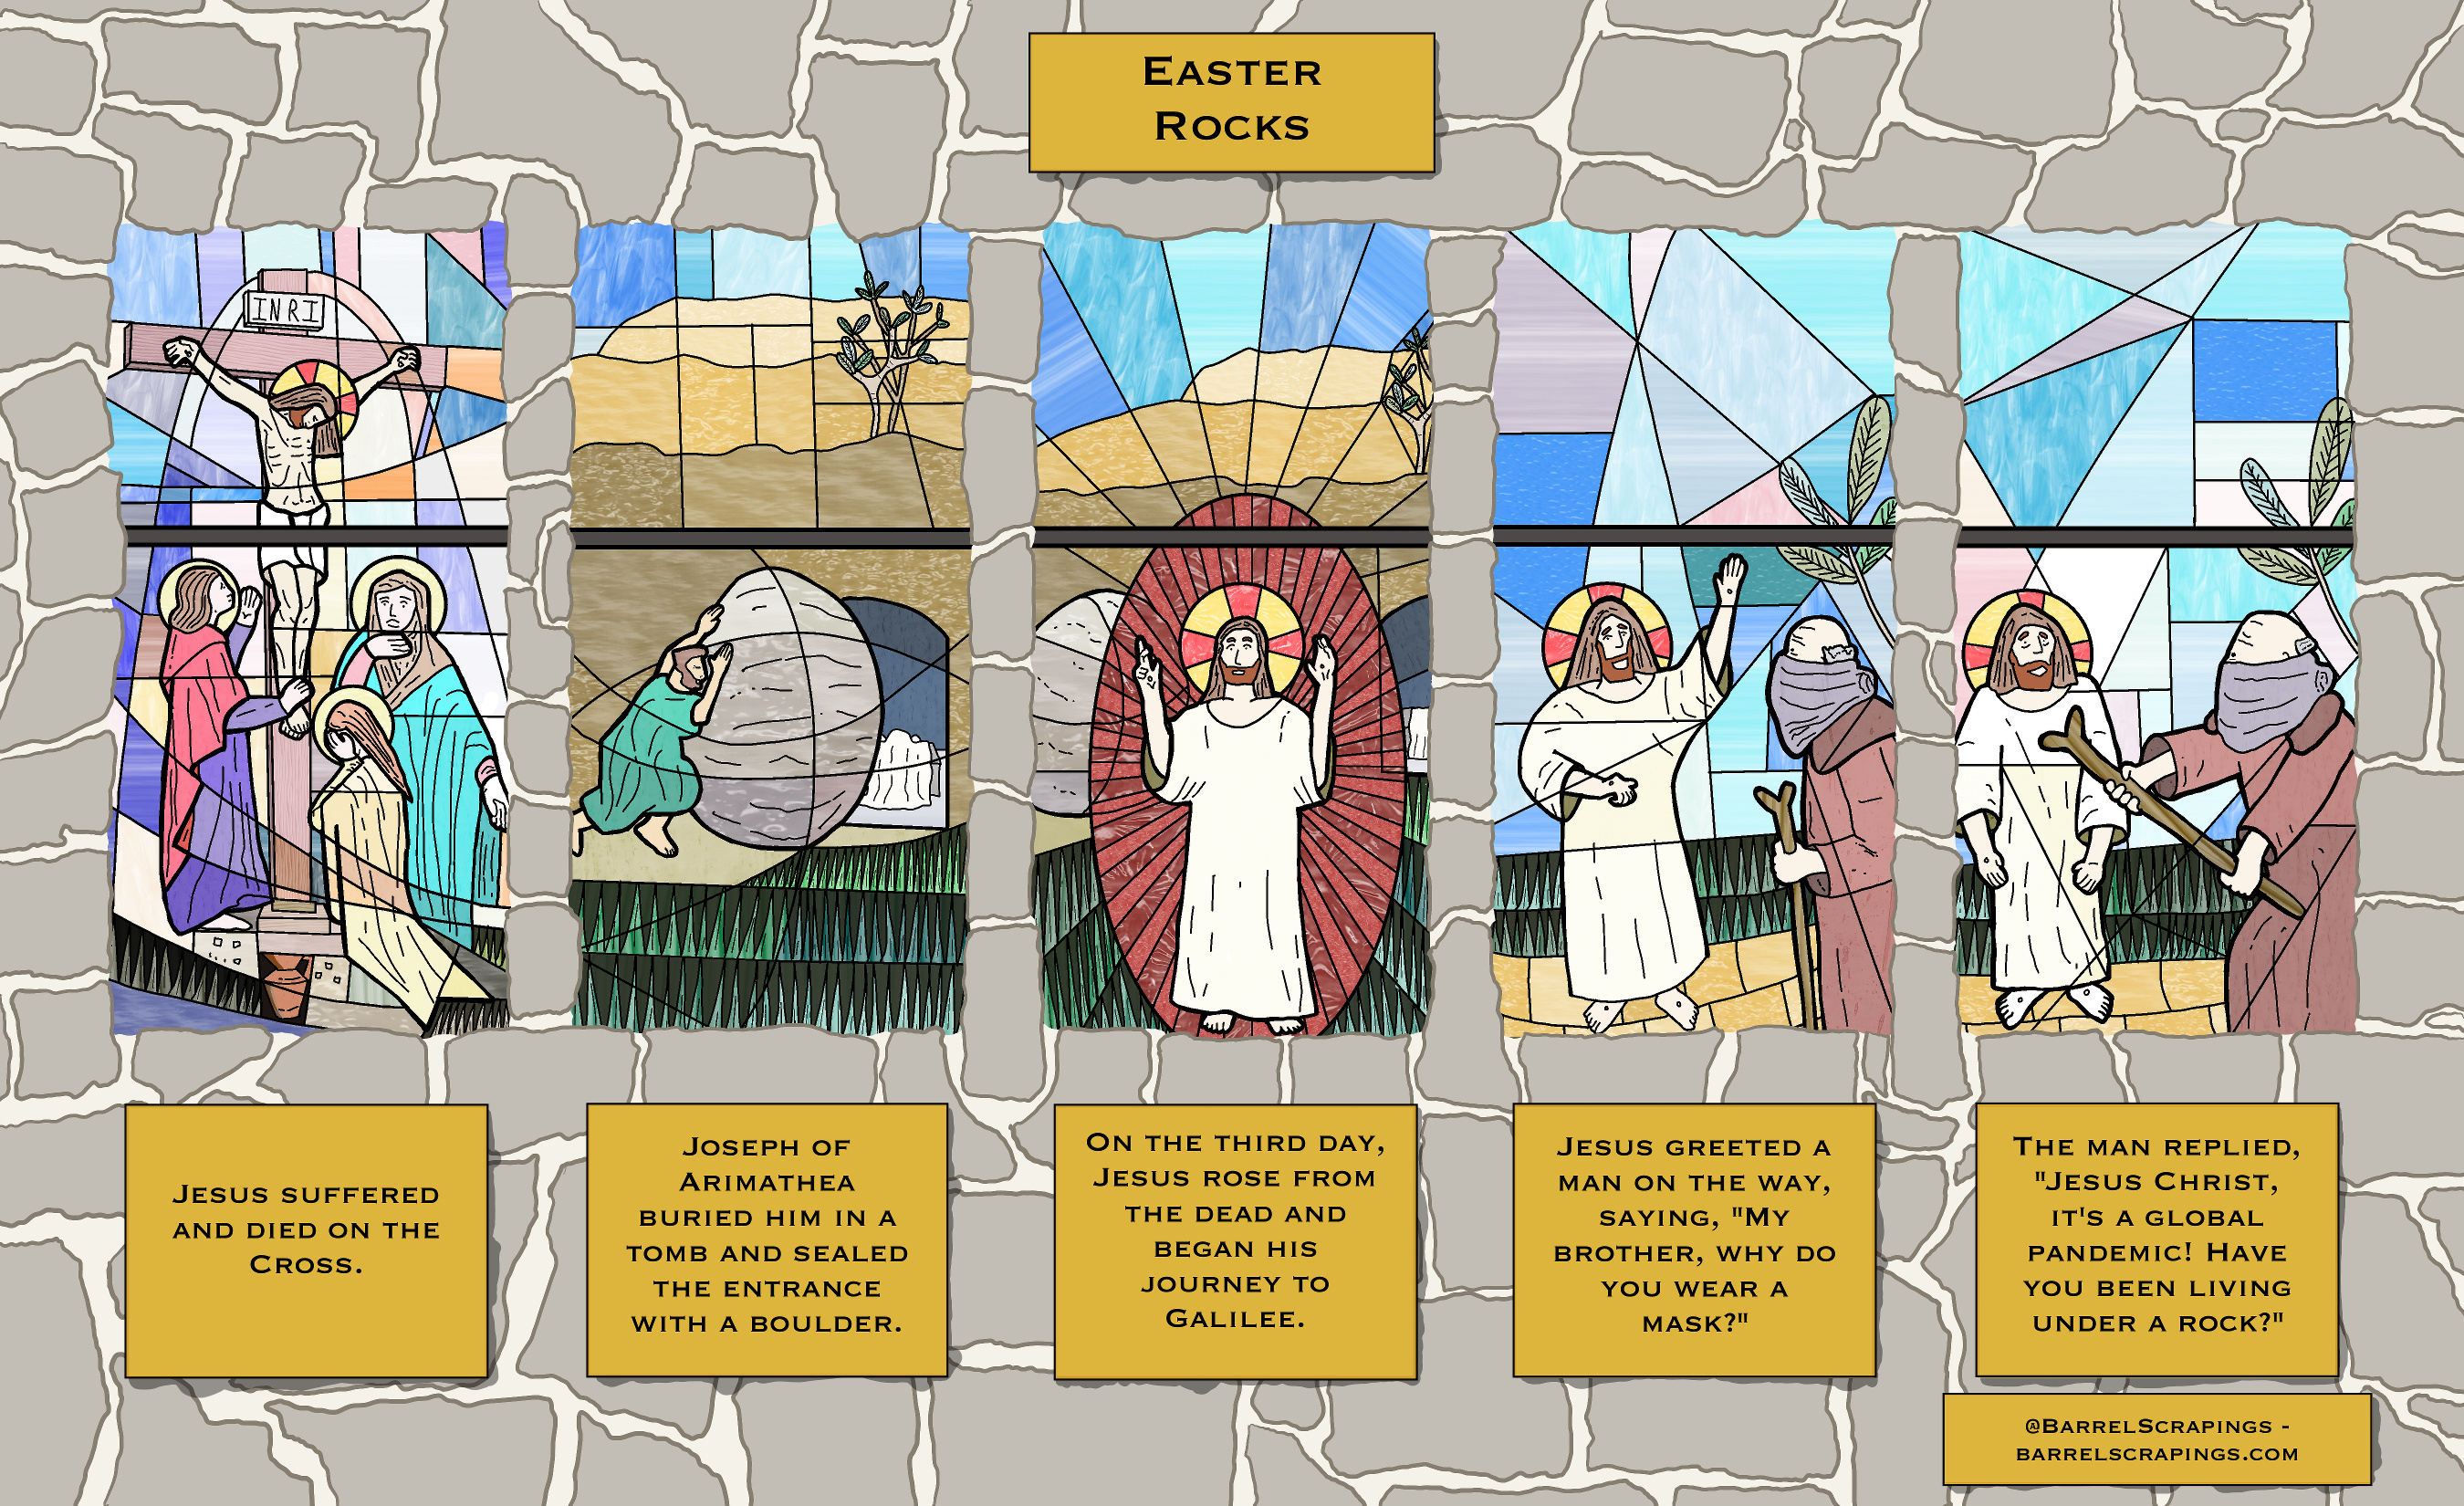 Five panel comic, in the style of stained glass windows in a church. First panel: Jesus on a cross with 3 figures at the foot of the cross. Captaion states “Jesus suffered and died on the cross.” Second panel: A man rolls a boulder to cover the entrance to a tomb in which a draped white cloth is seen. “Joseph of Arimathea buried him in a tomb and sealed the entrance with a boulder.” Third panel: The boulder is rolled away, the tomb is empty. Jesus stands in front with arms outraised. “On the third day, Jesus rose from the dead and began his journey to Galilee.” Fourth panel: Jesus waves at a man walking with a stick, his whole face obscured by a mask. “Jesus greeted a man on the way, saying, “My brother, why do you wear a mask?”. Fifth panel: The man with the stick points it at Jesus; Jesus looks crestfallen. “The man replied, ‘Jesus Christ, it’s a global pandemic! Have you been living under a rock?'” 